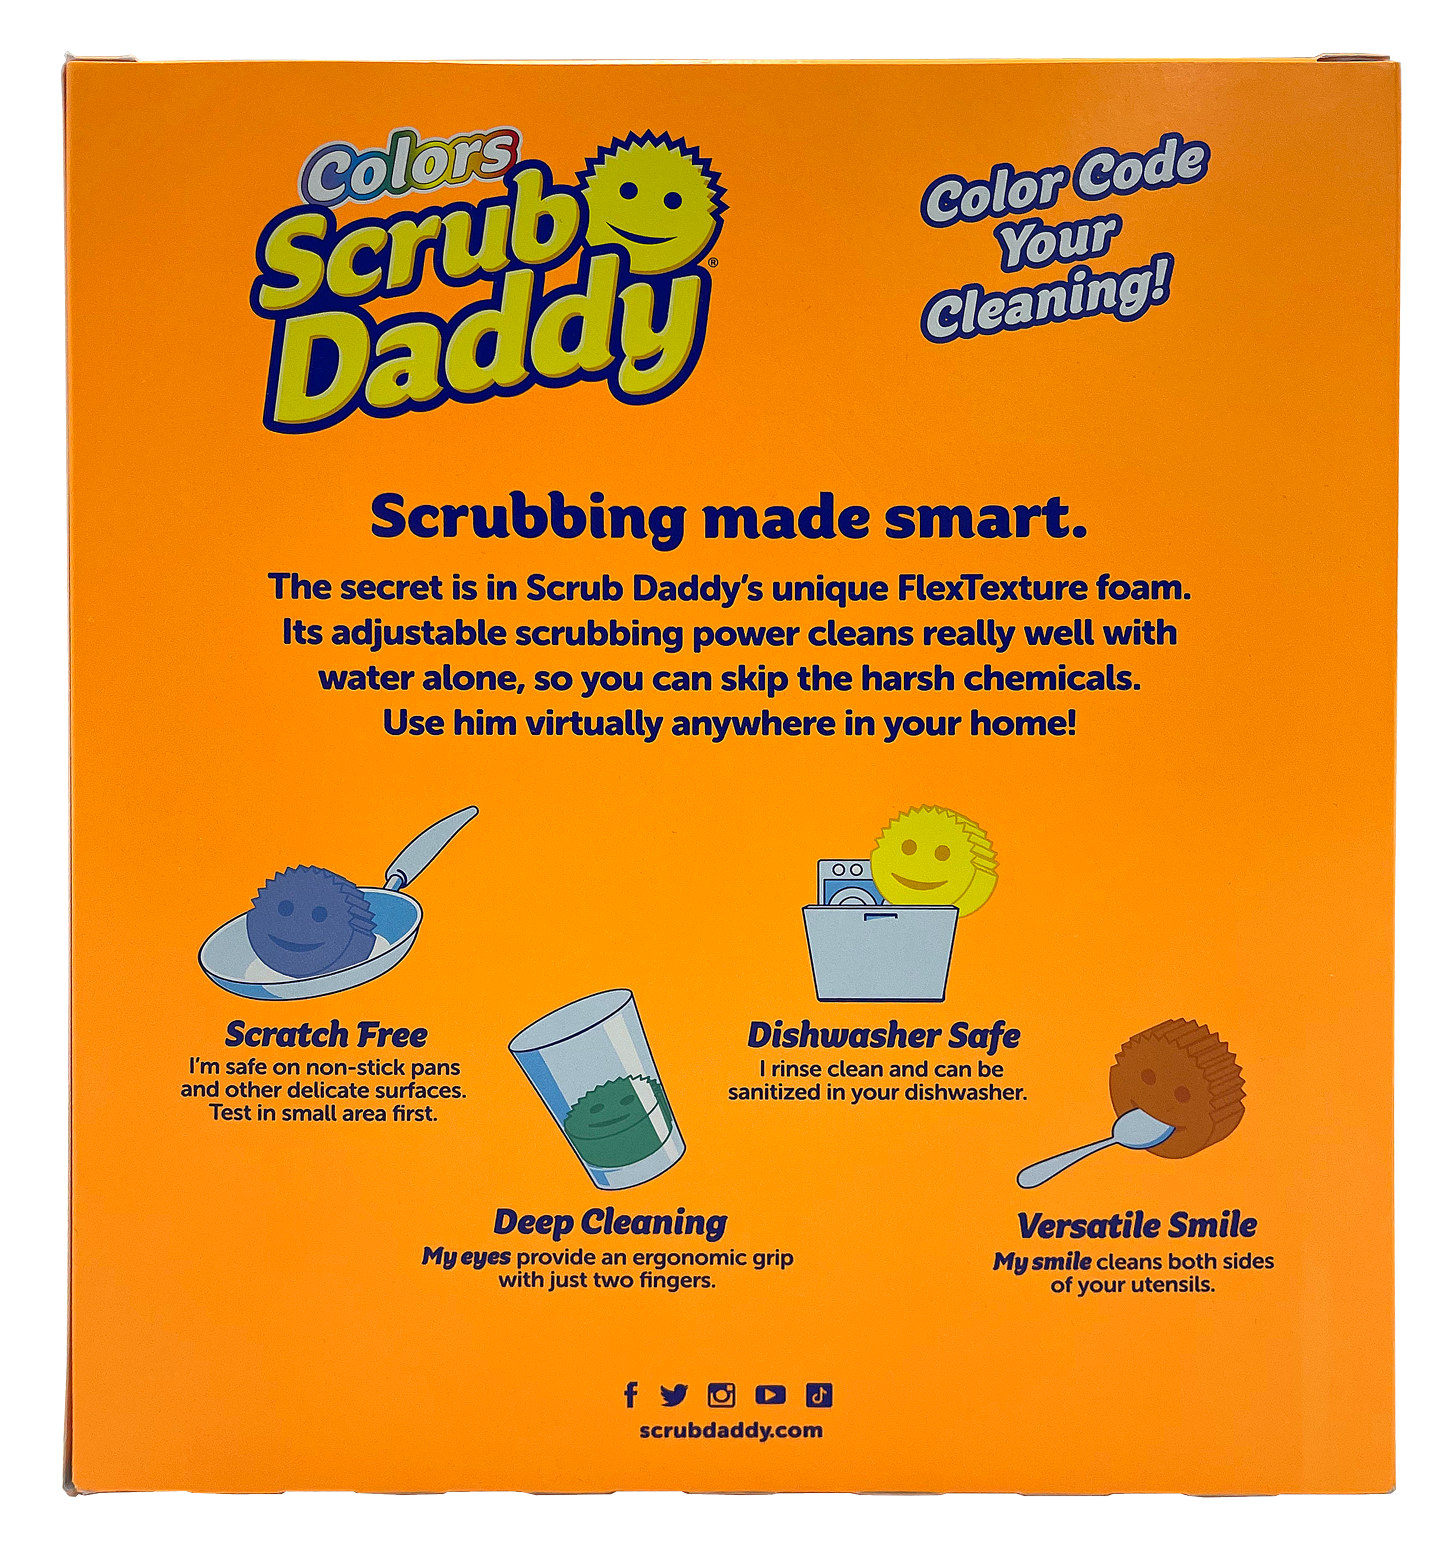 ICT Solutions LLC - When you're Scrub Daddy wants to participate